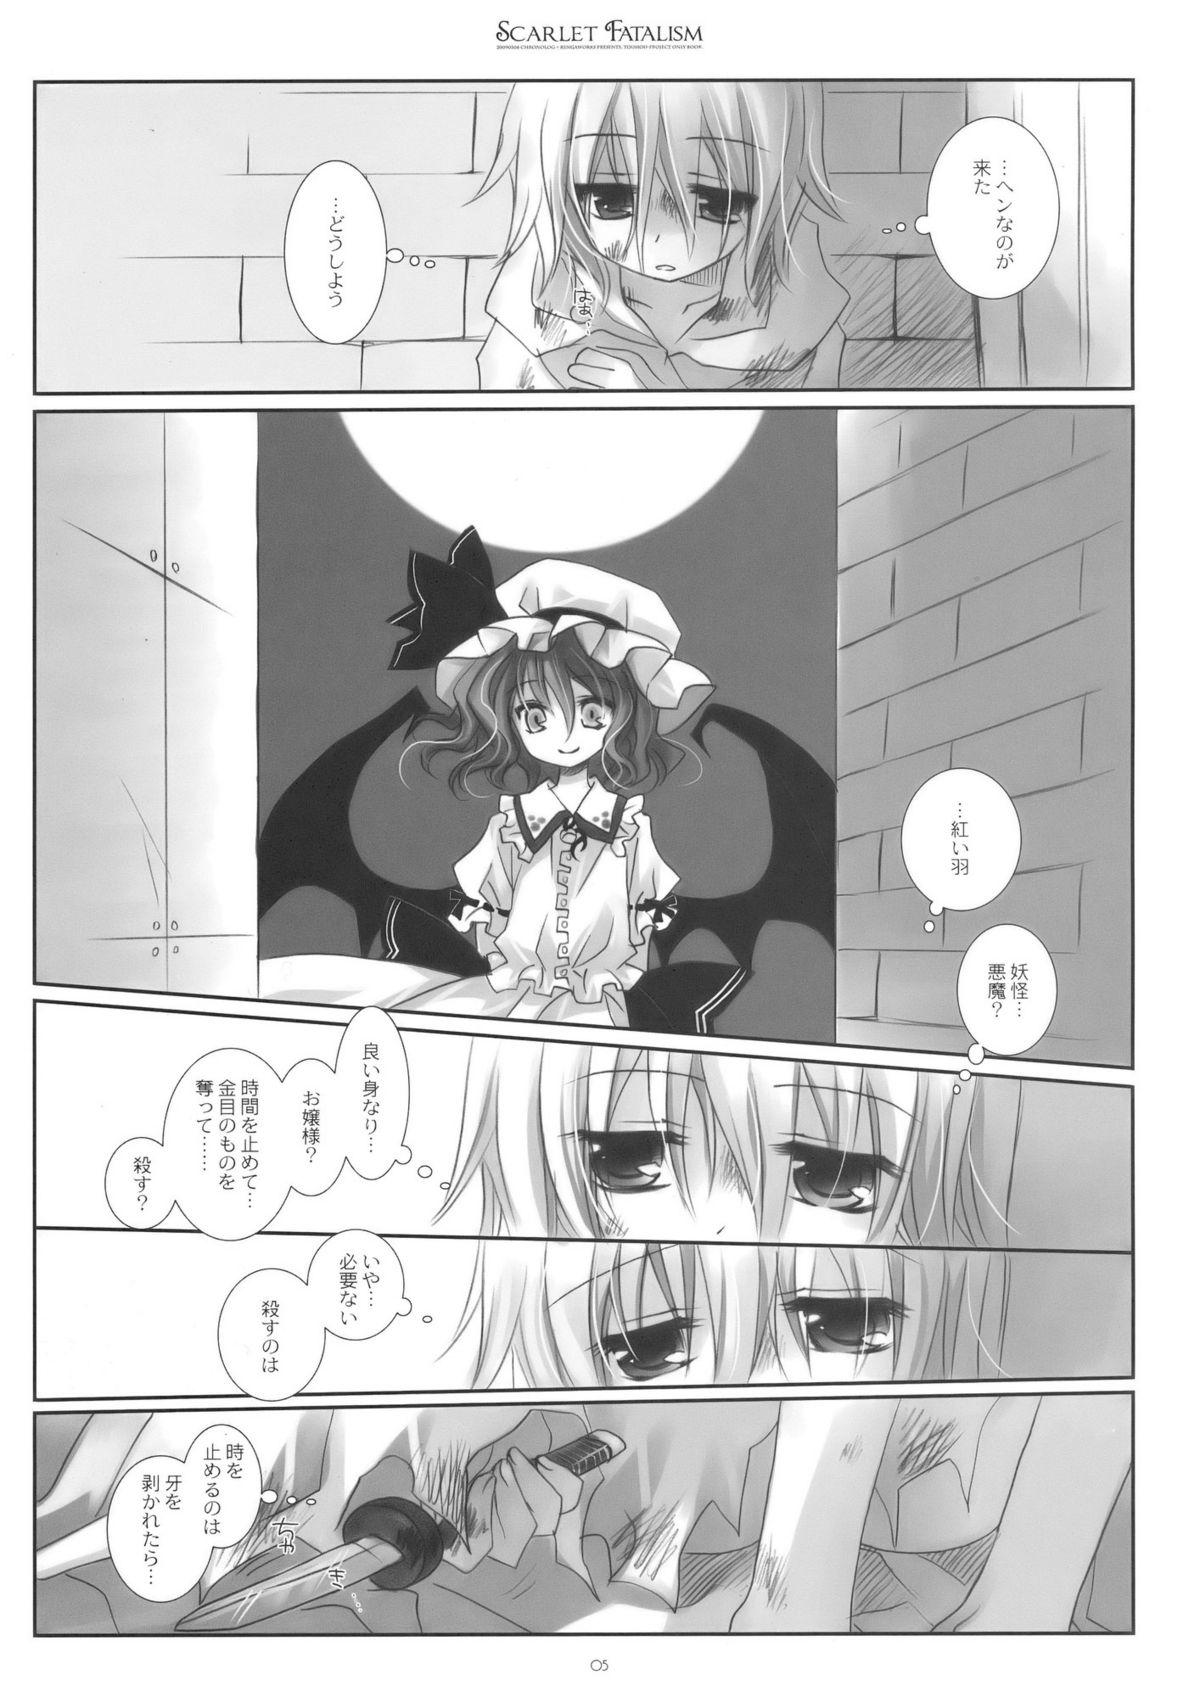 Outside Scarlet Fatalism - Touhou project Blackmail - Page 5